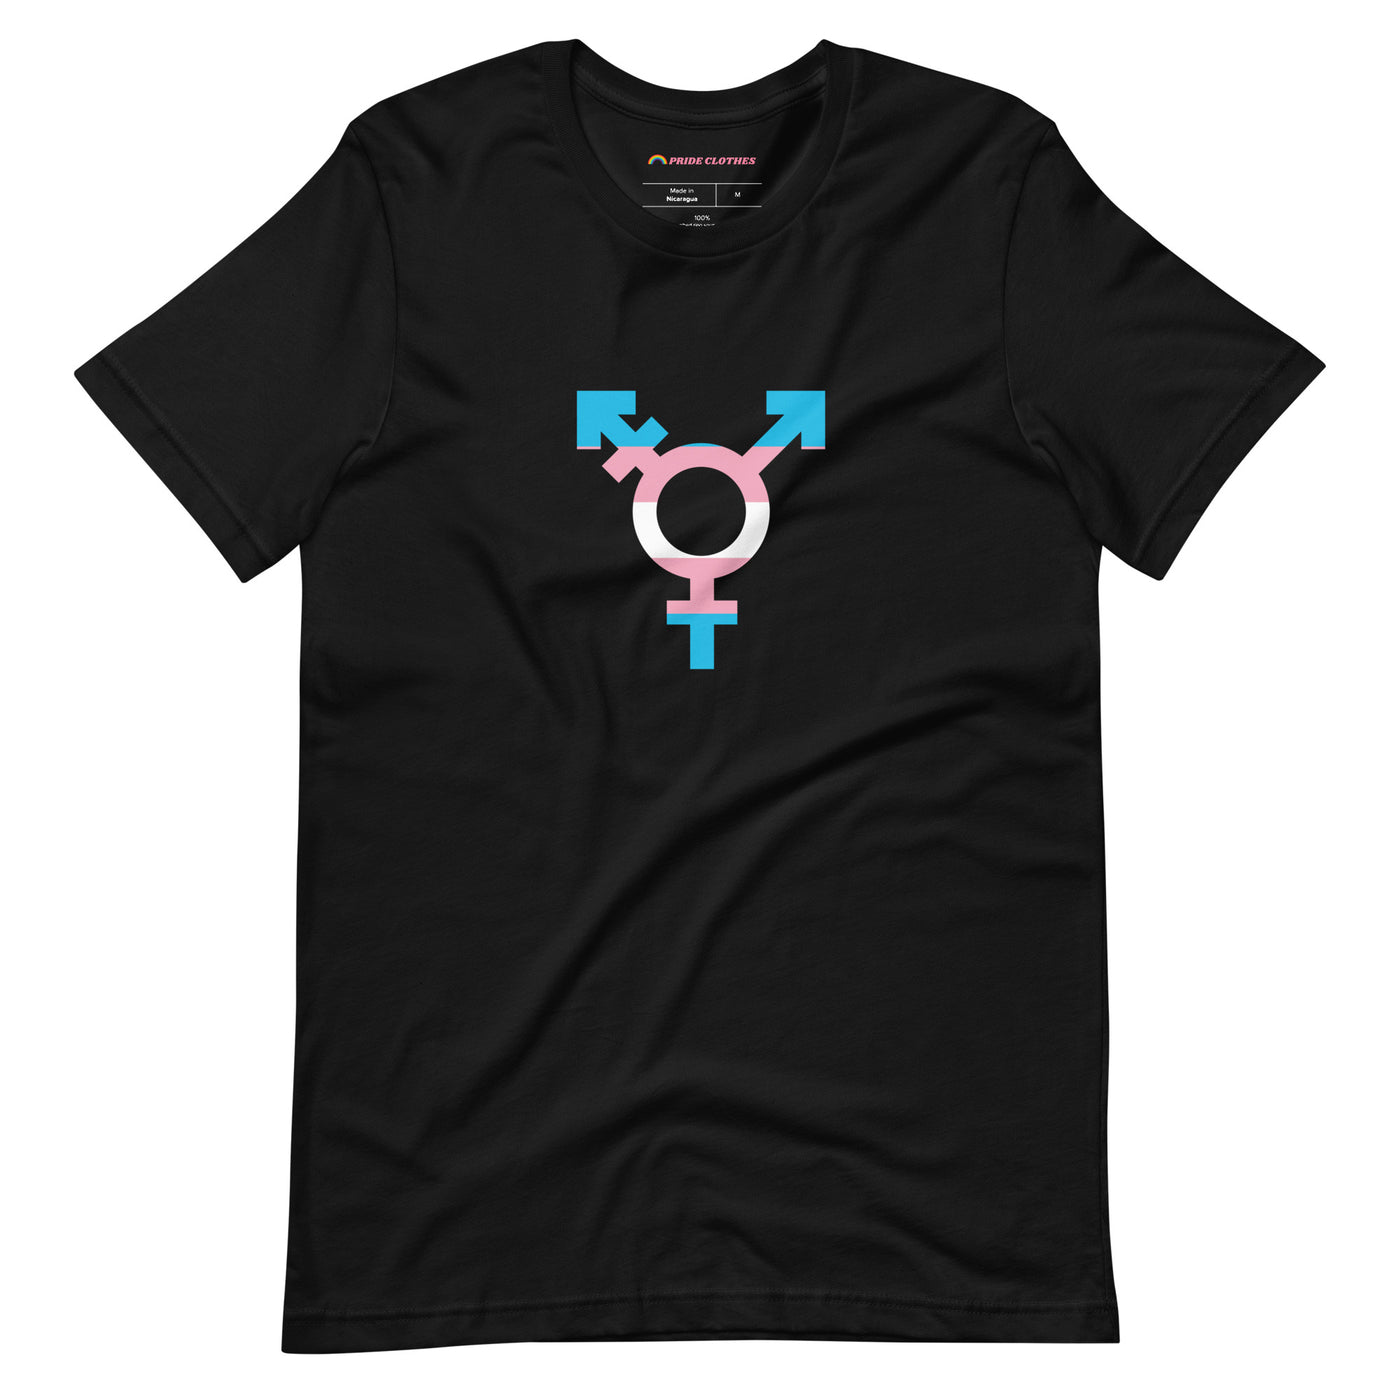 Pride Clothes - Authentic and Beautiful Trans Pride Flag Symbol T-Shirt - Black